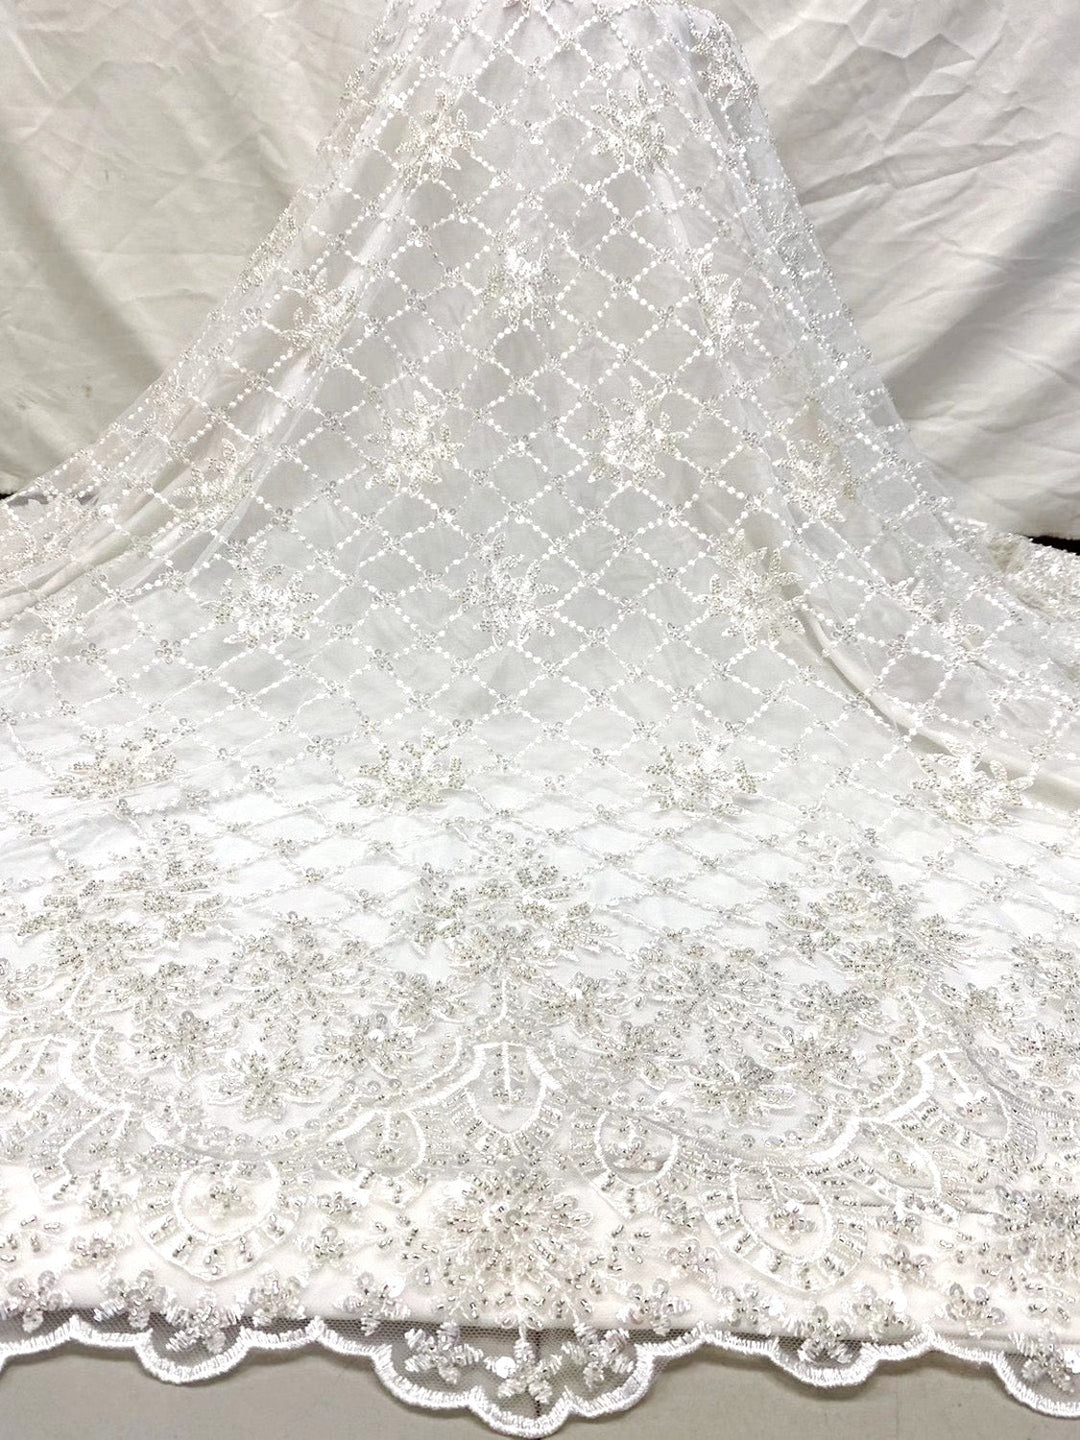 5 YARDS / 3 COLORS / Beautiful Regal Beaded Sequin Embroidery Beaded Tulle Mesh Lace - Classic & Modern